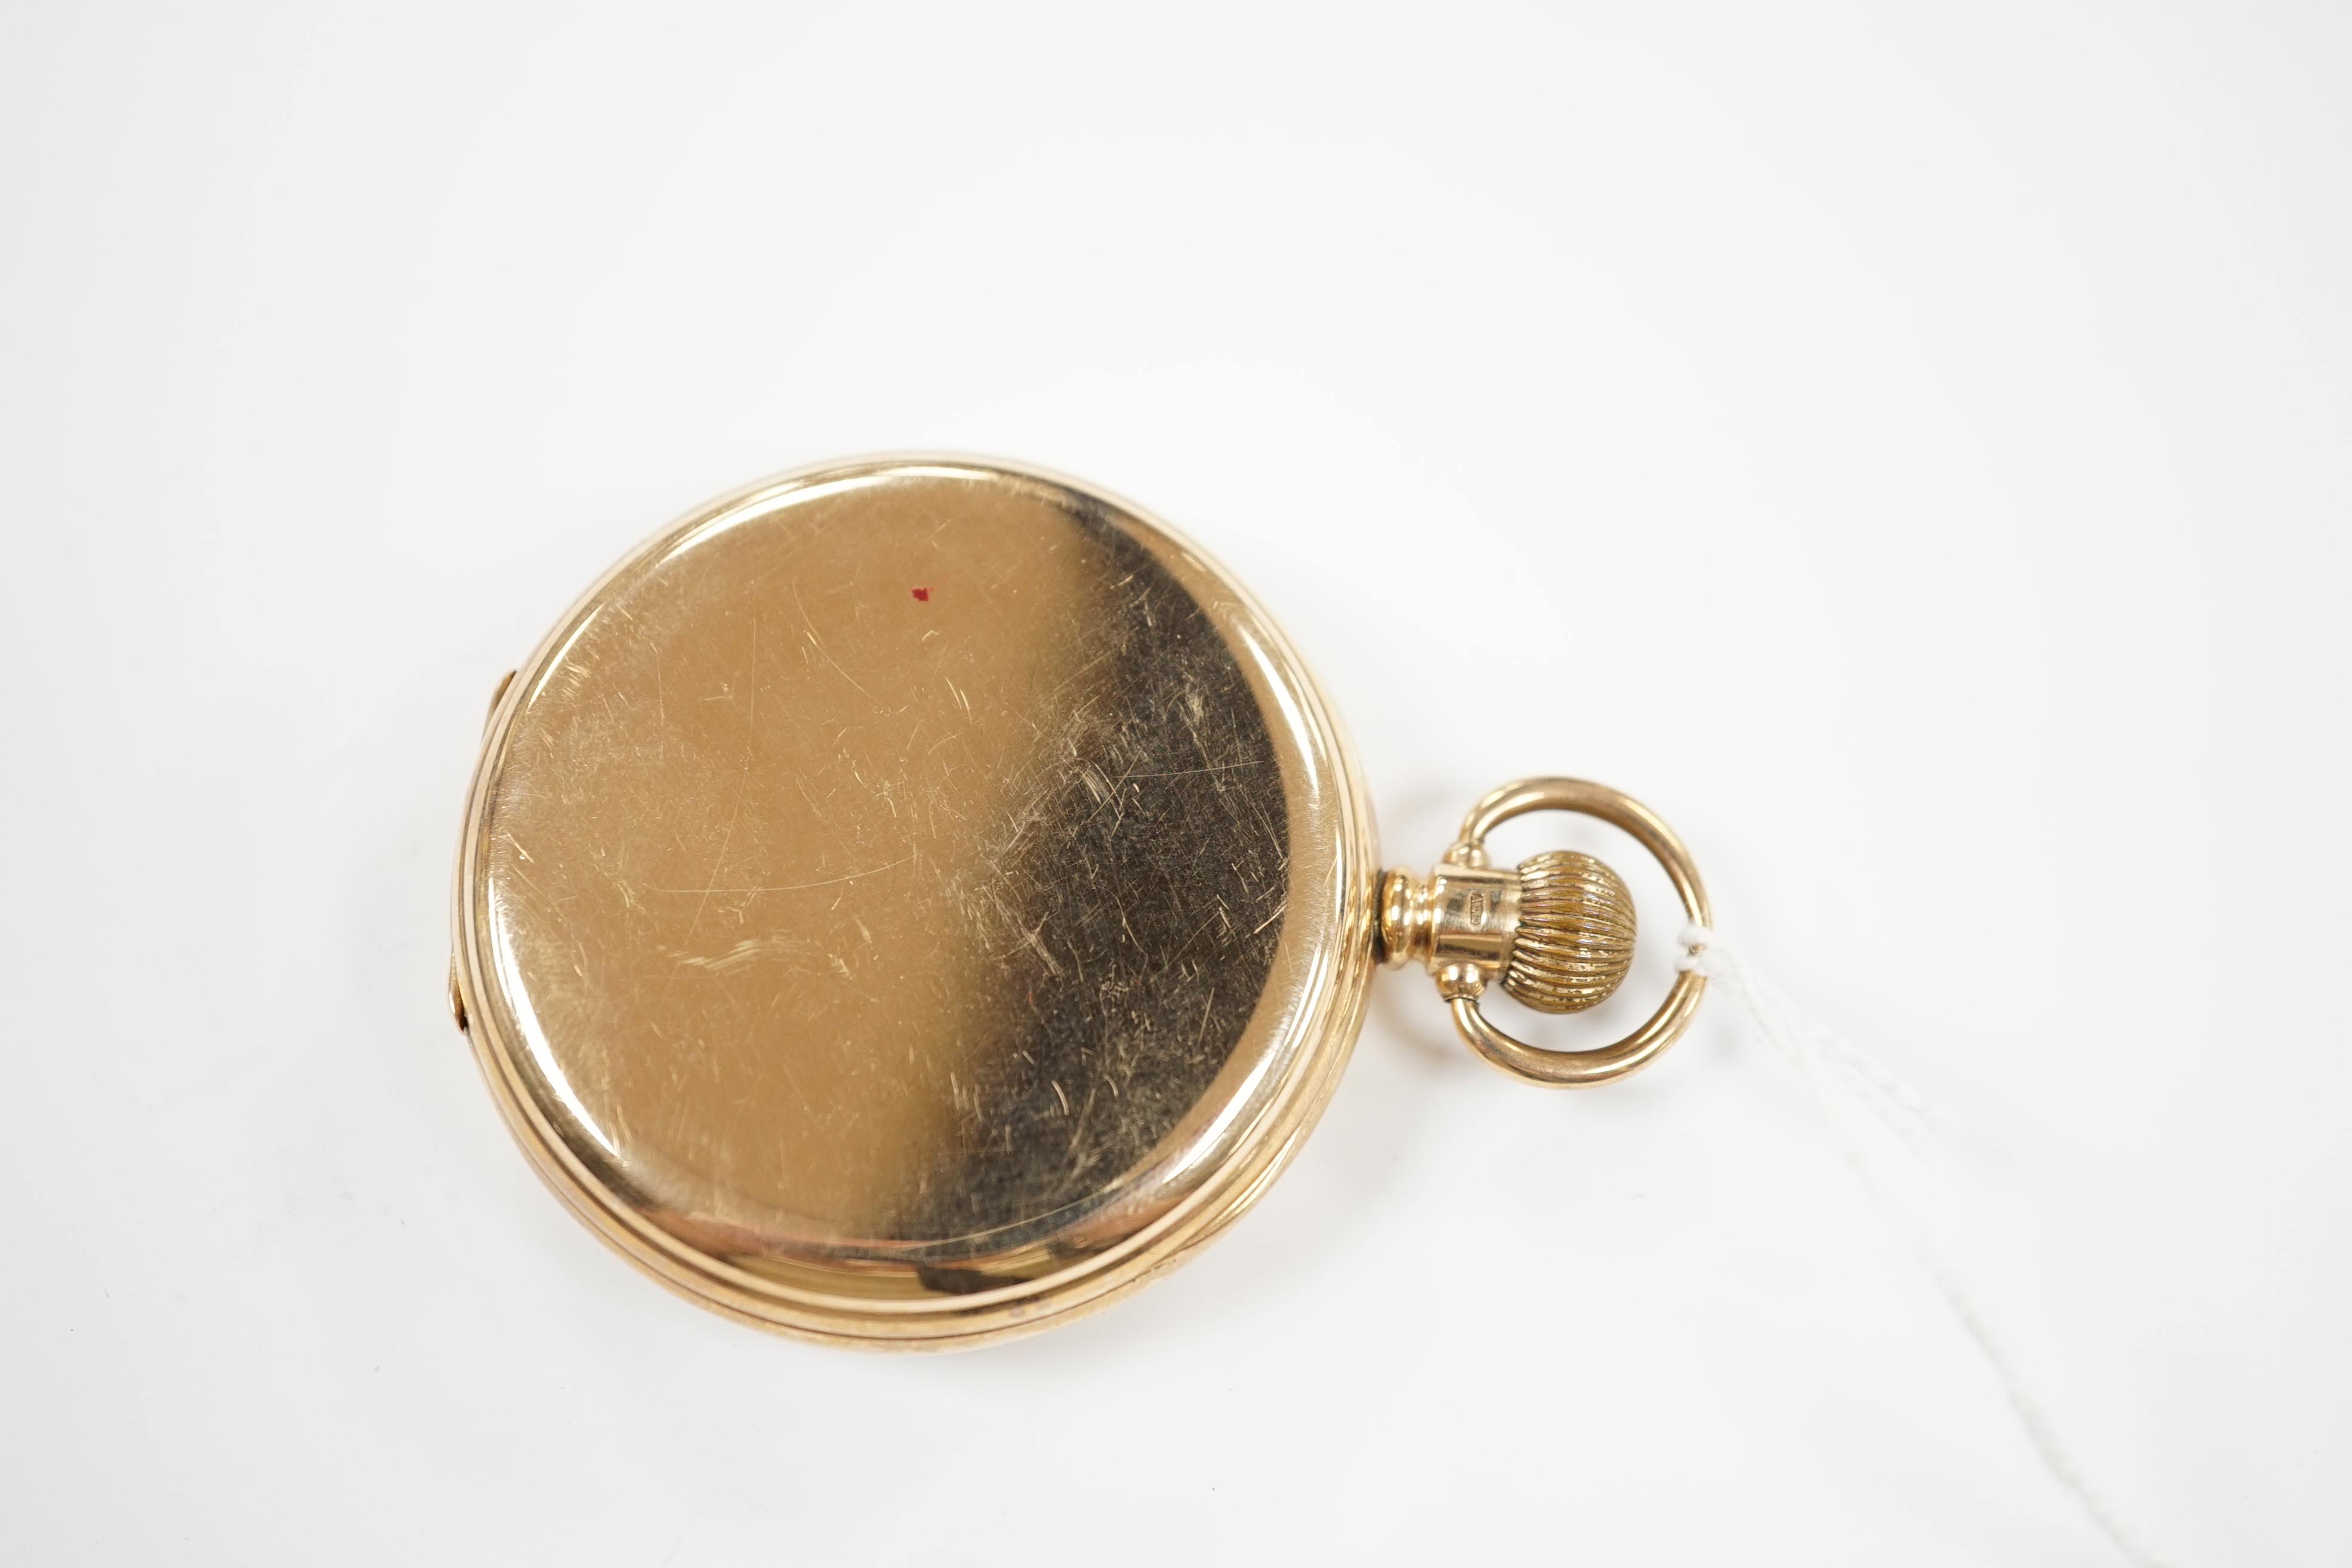 A George V 9ct gold keyless hunter pocket watch by Waltham, case diameter 50mm, gross weight 105.4 grams.